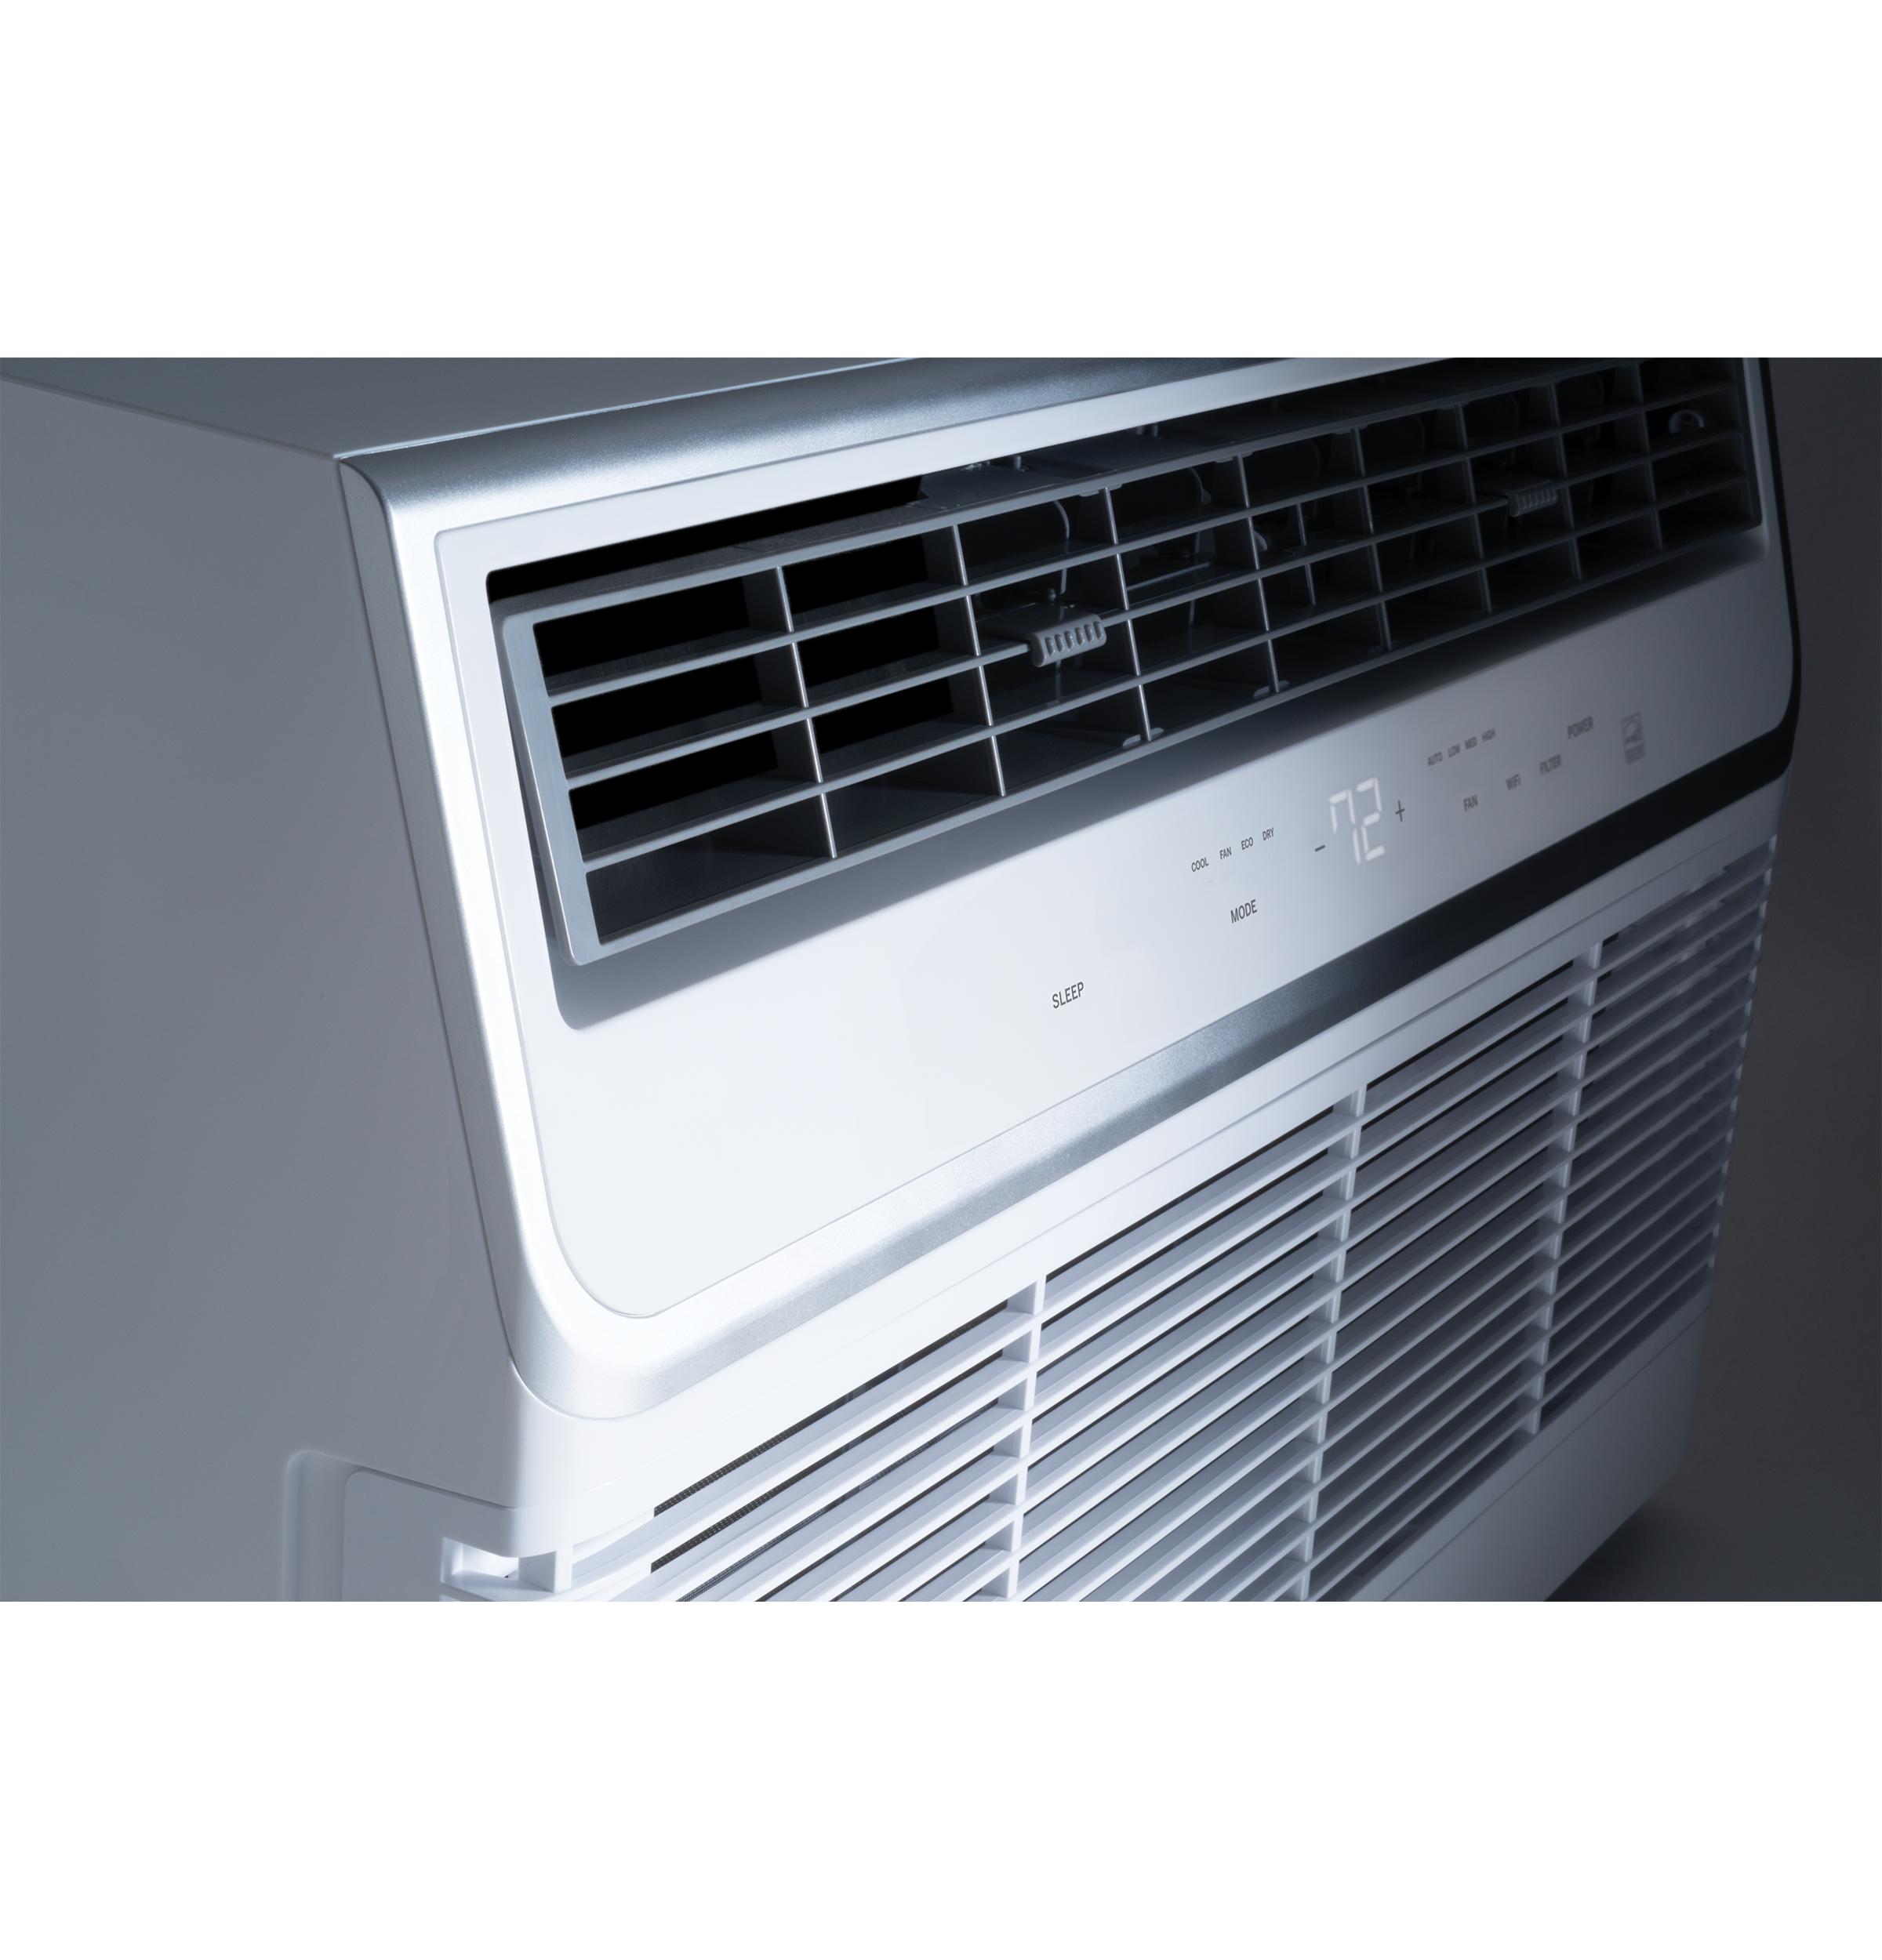 GE® ENERGY STAR® 115 Volt Built-In Cool-Only Room Air Conditioner